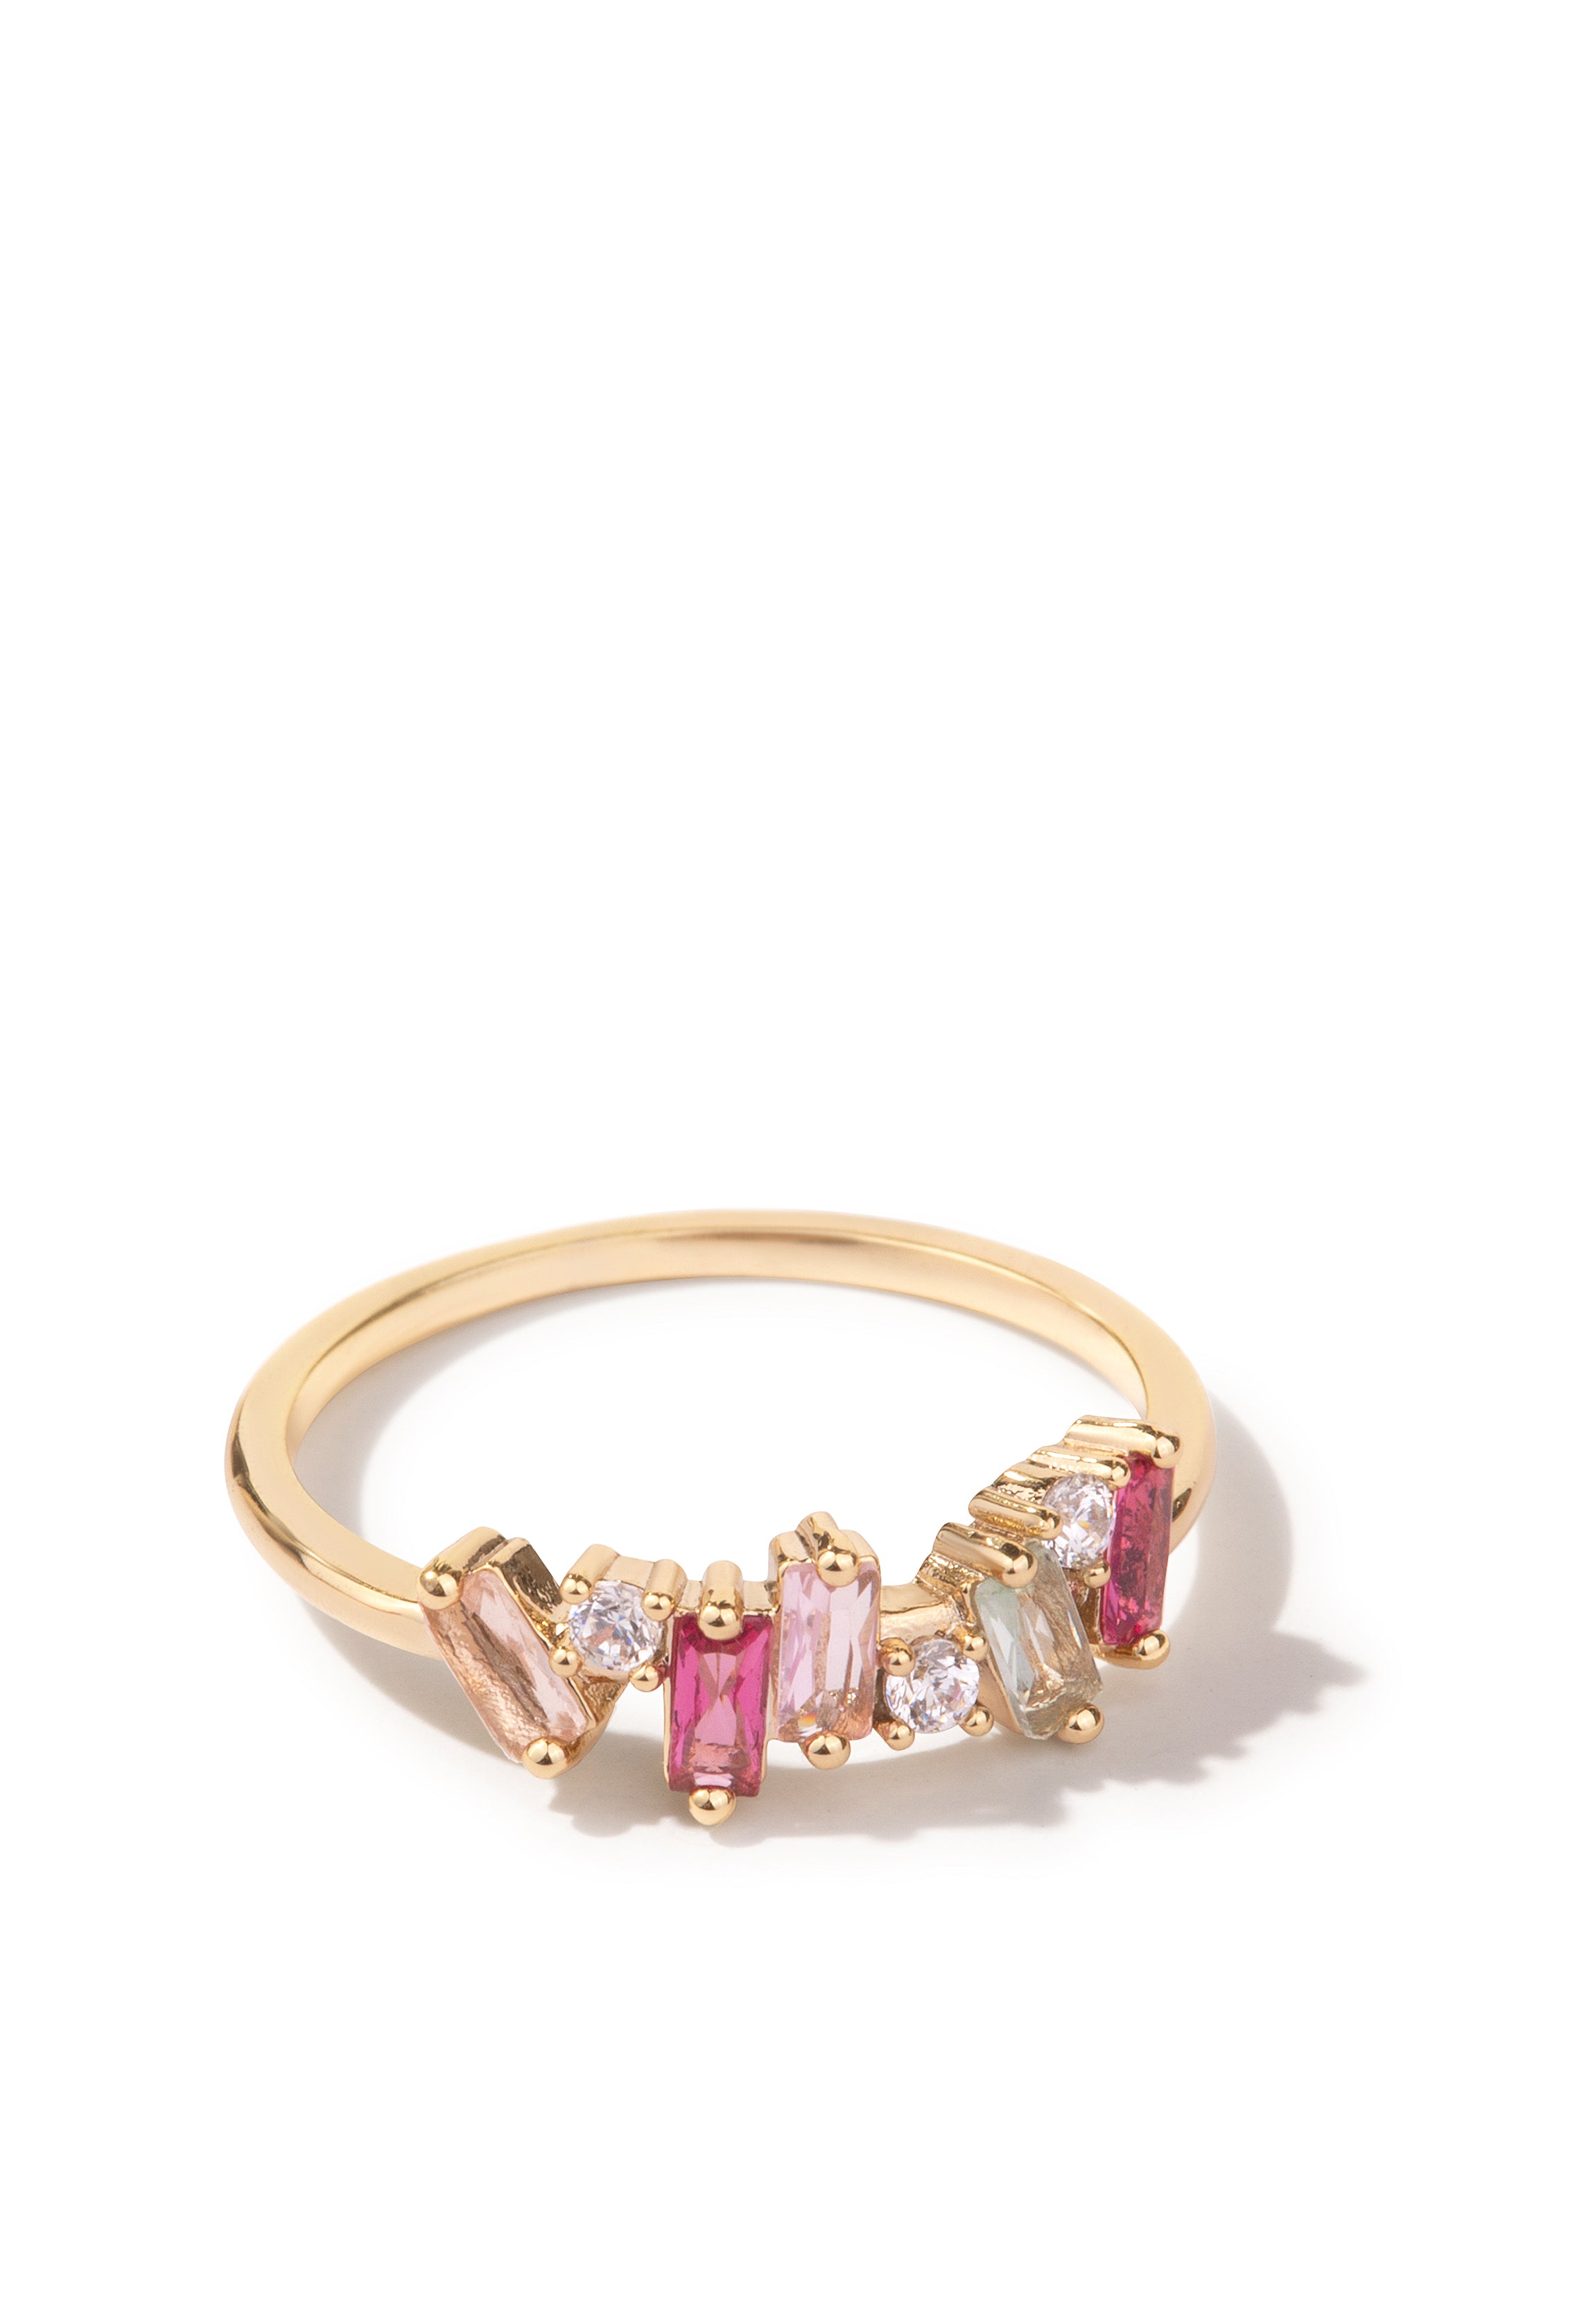 Gold Sealed Band Ring w/ Baguette Crystals | Roulette Gold Sealed by ...